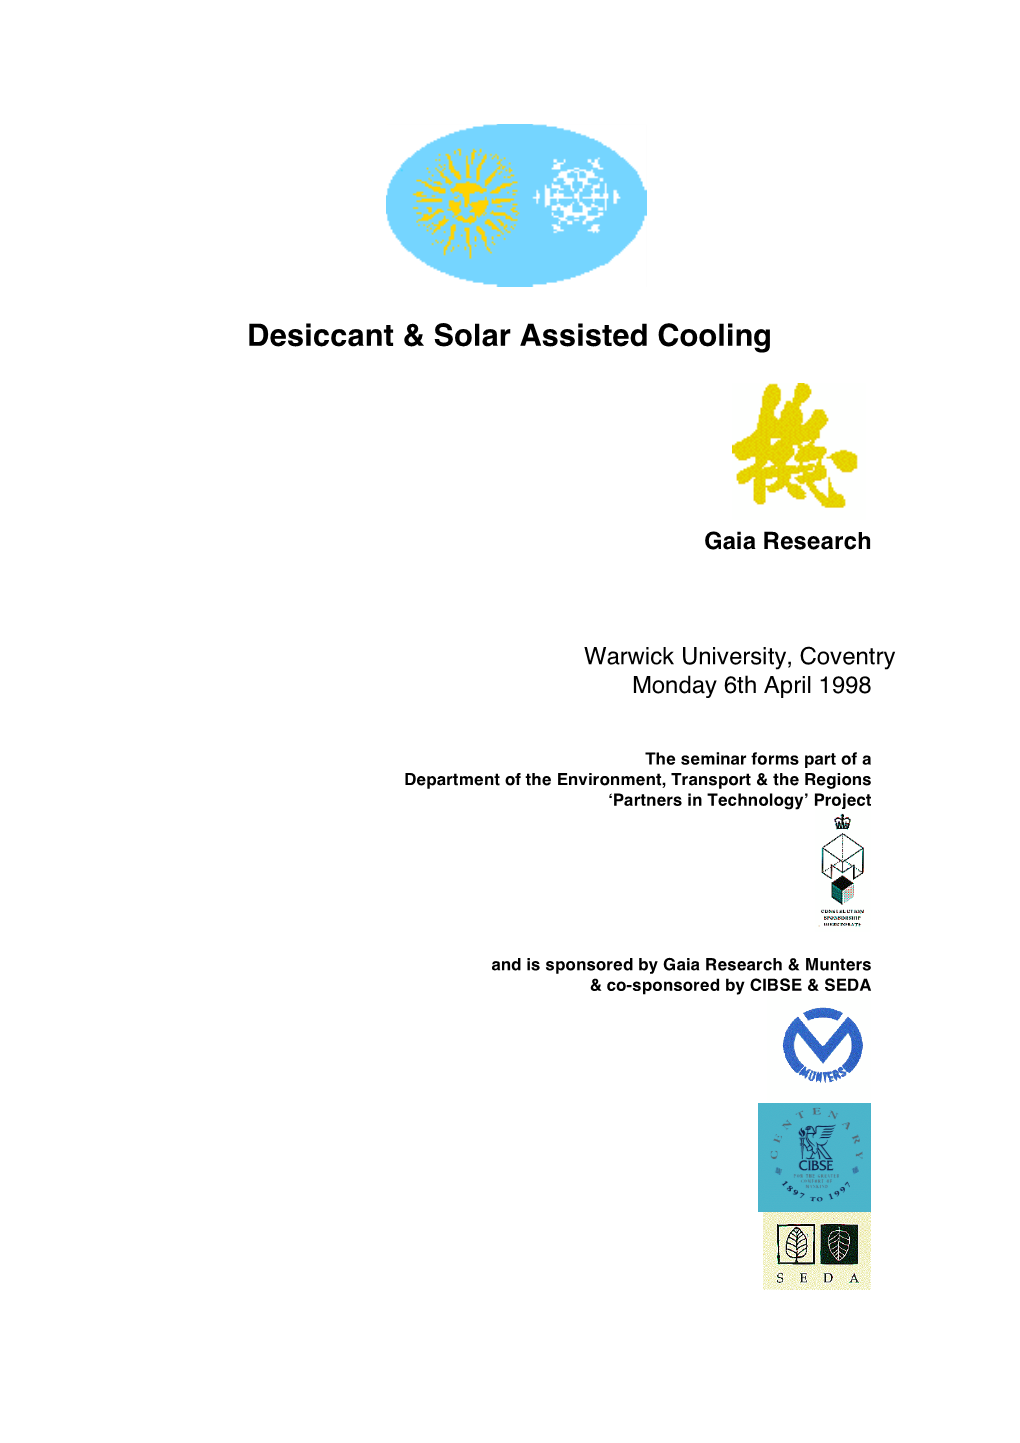 Solar Air Conditioning Project Sandy Halliday: Gaia Research